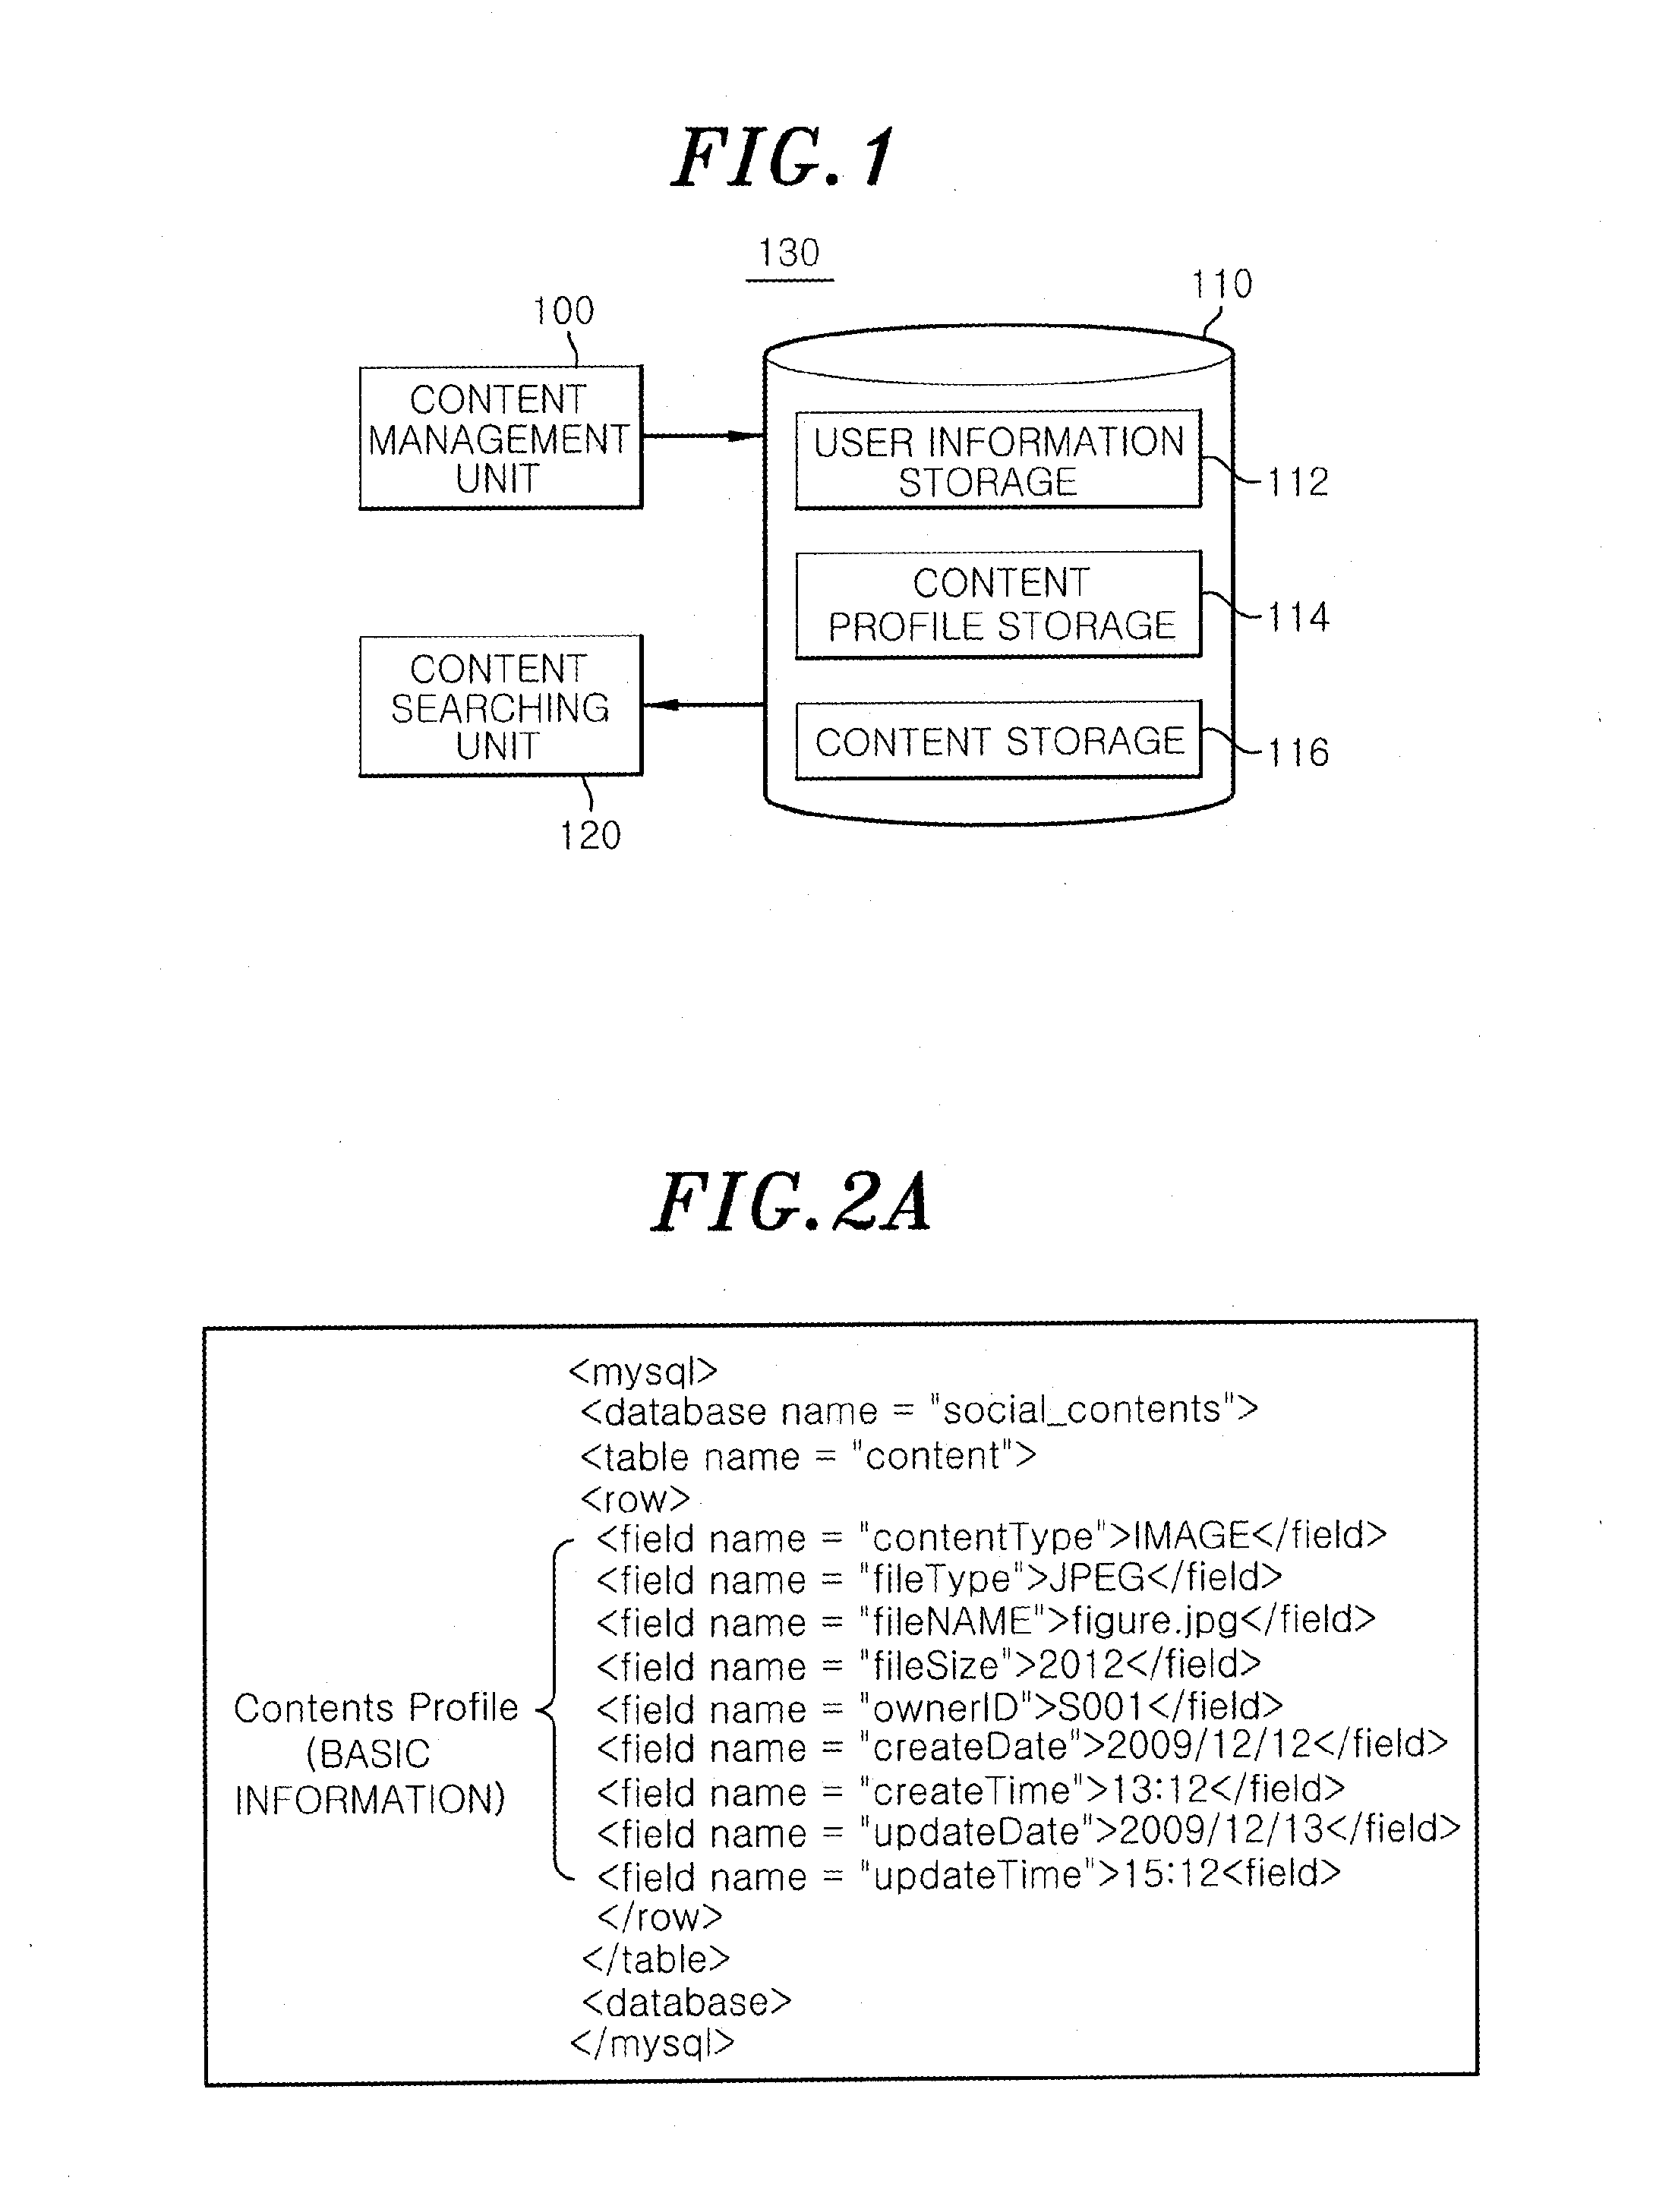 Apparatus and method for sharing social media content